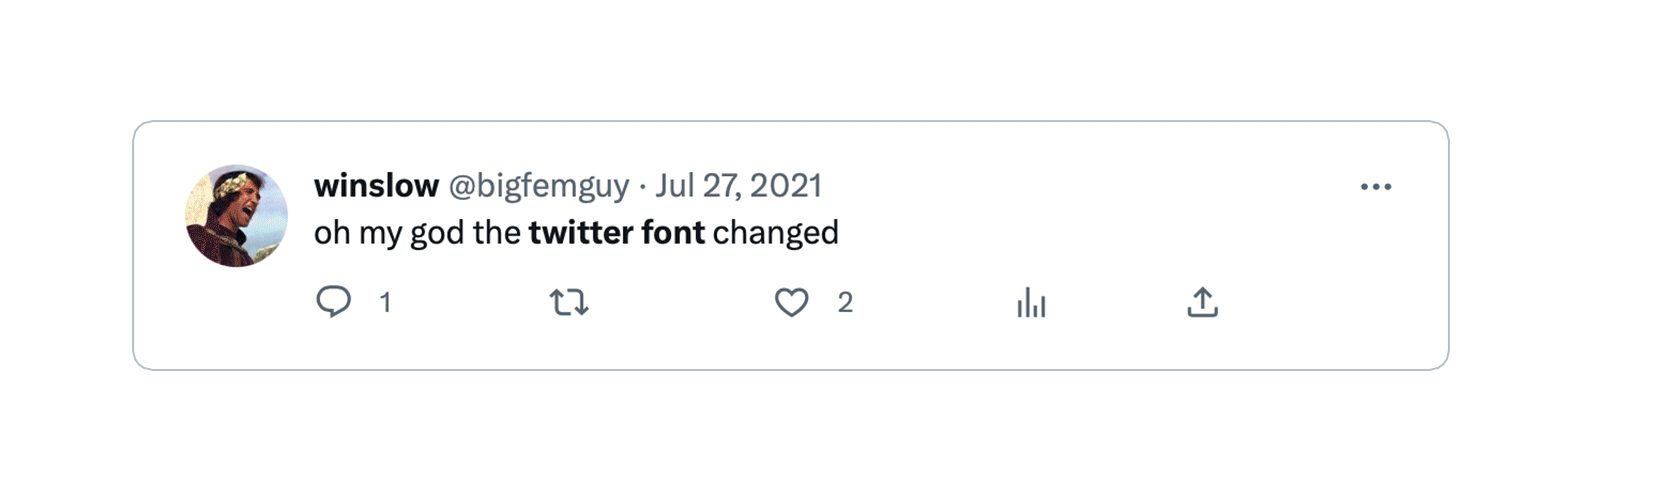 Complaints about the change of font on Twitter